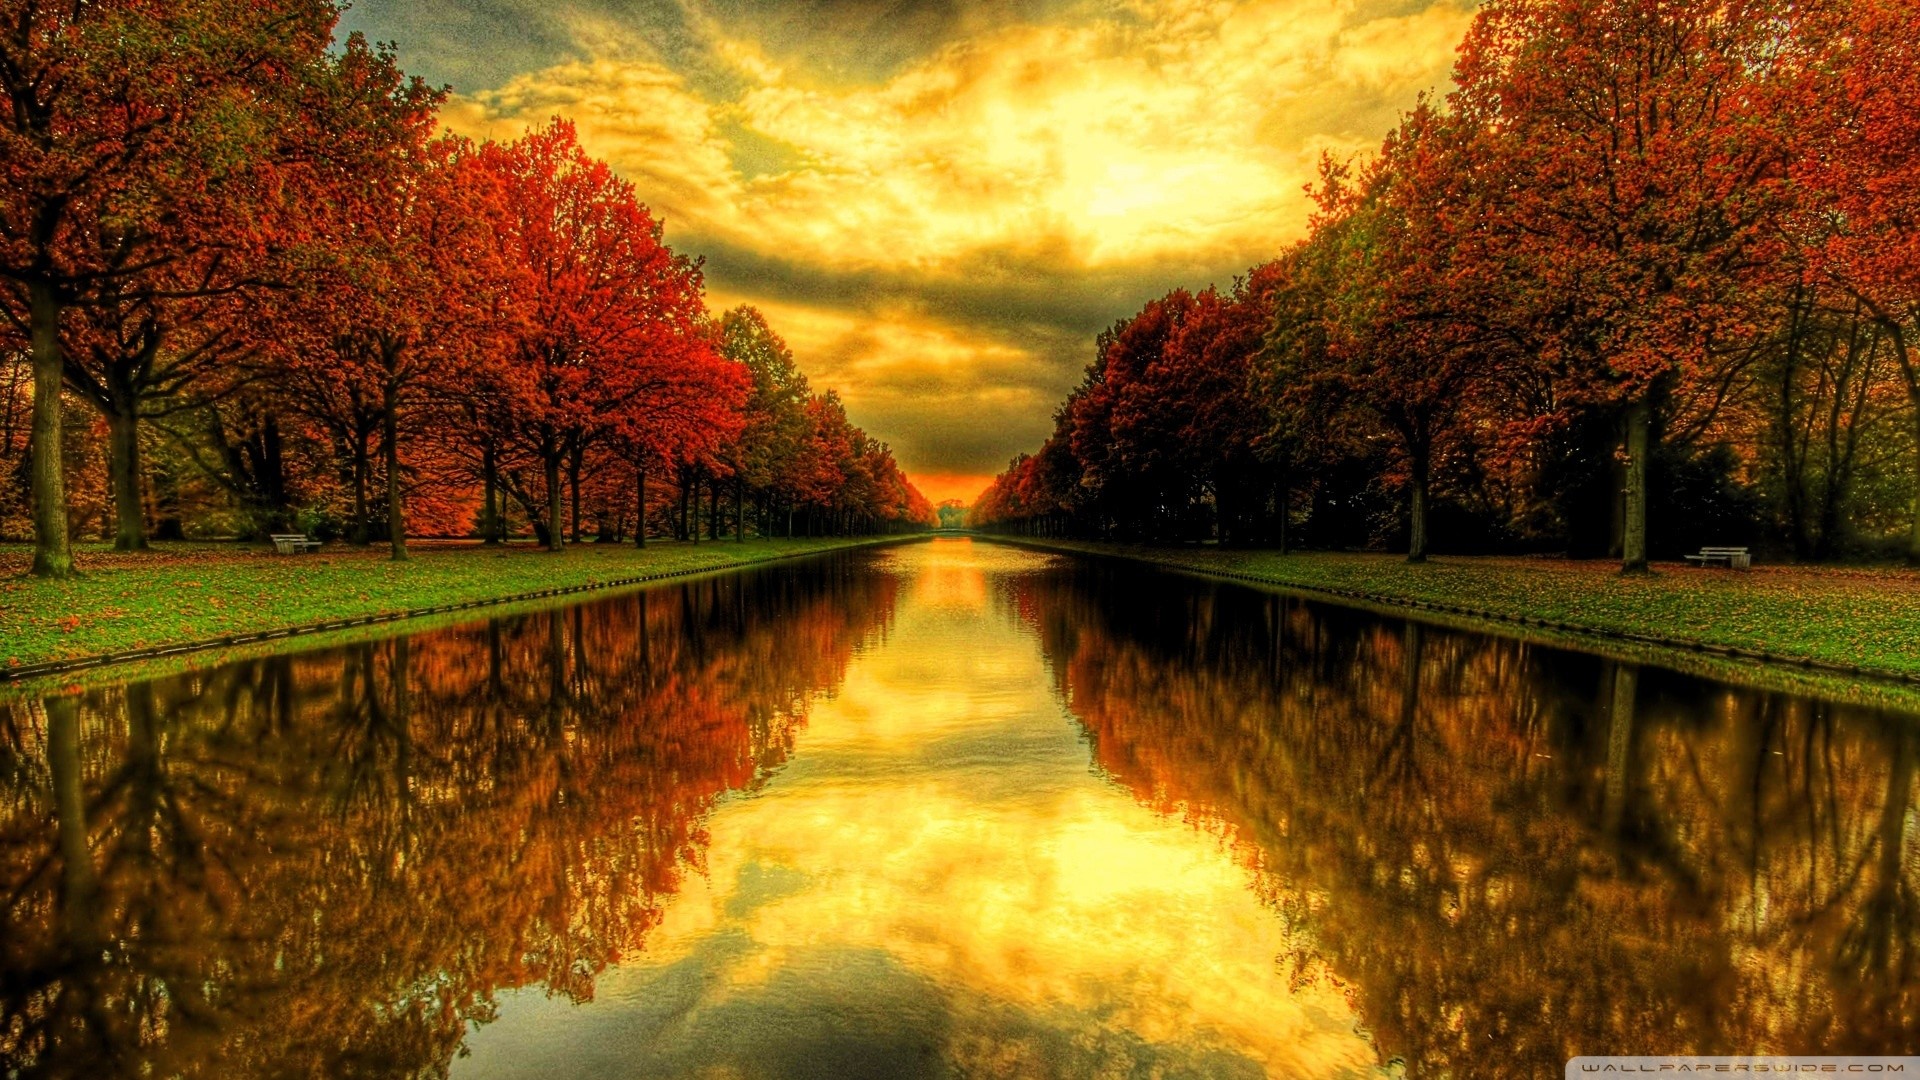 Autumn & Fall Season Hd Wallpapers For Download 
 Data - Hd Wallpaper Fall - HD Wallpaper 